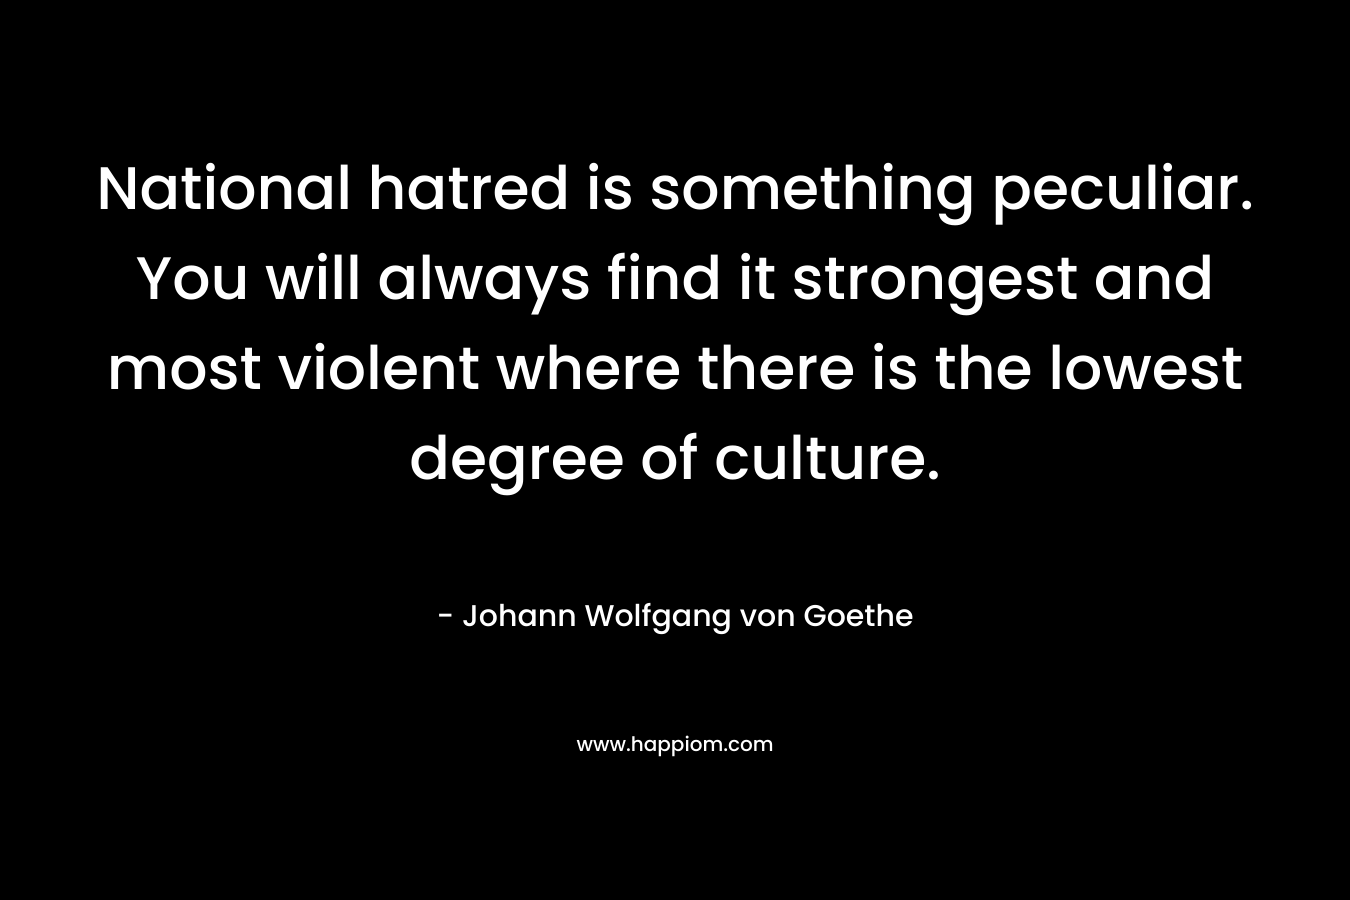 National hatred is something peculiar. You will always find it strongest and most violent where there is the lowest degree of culture. – Johann Wolfgang von Goethe